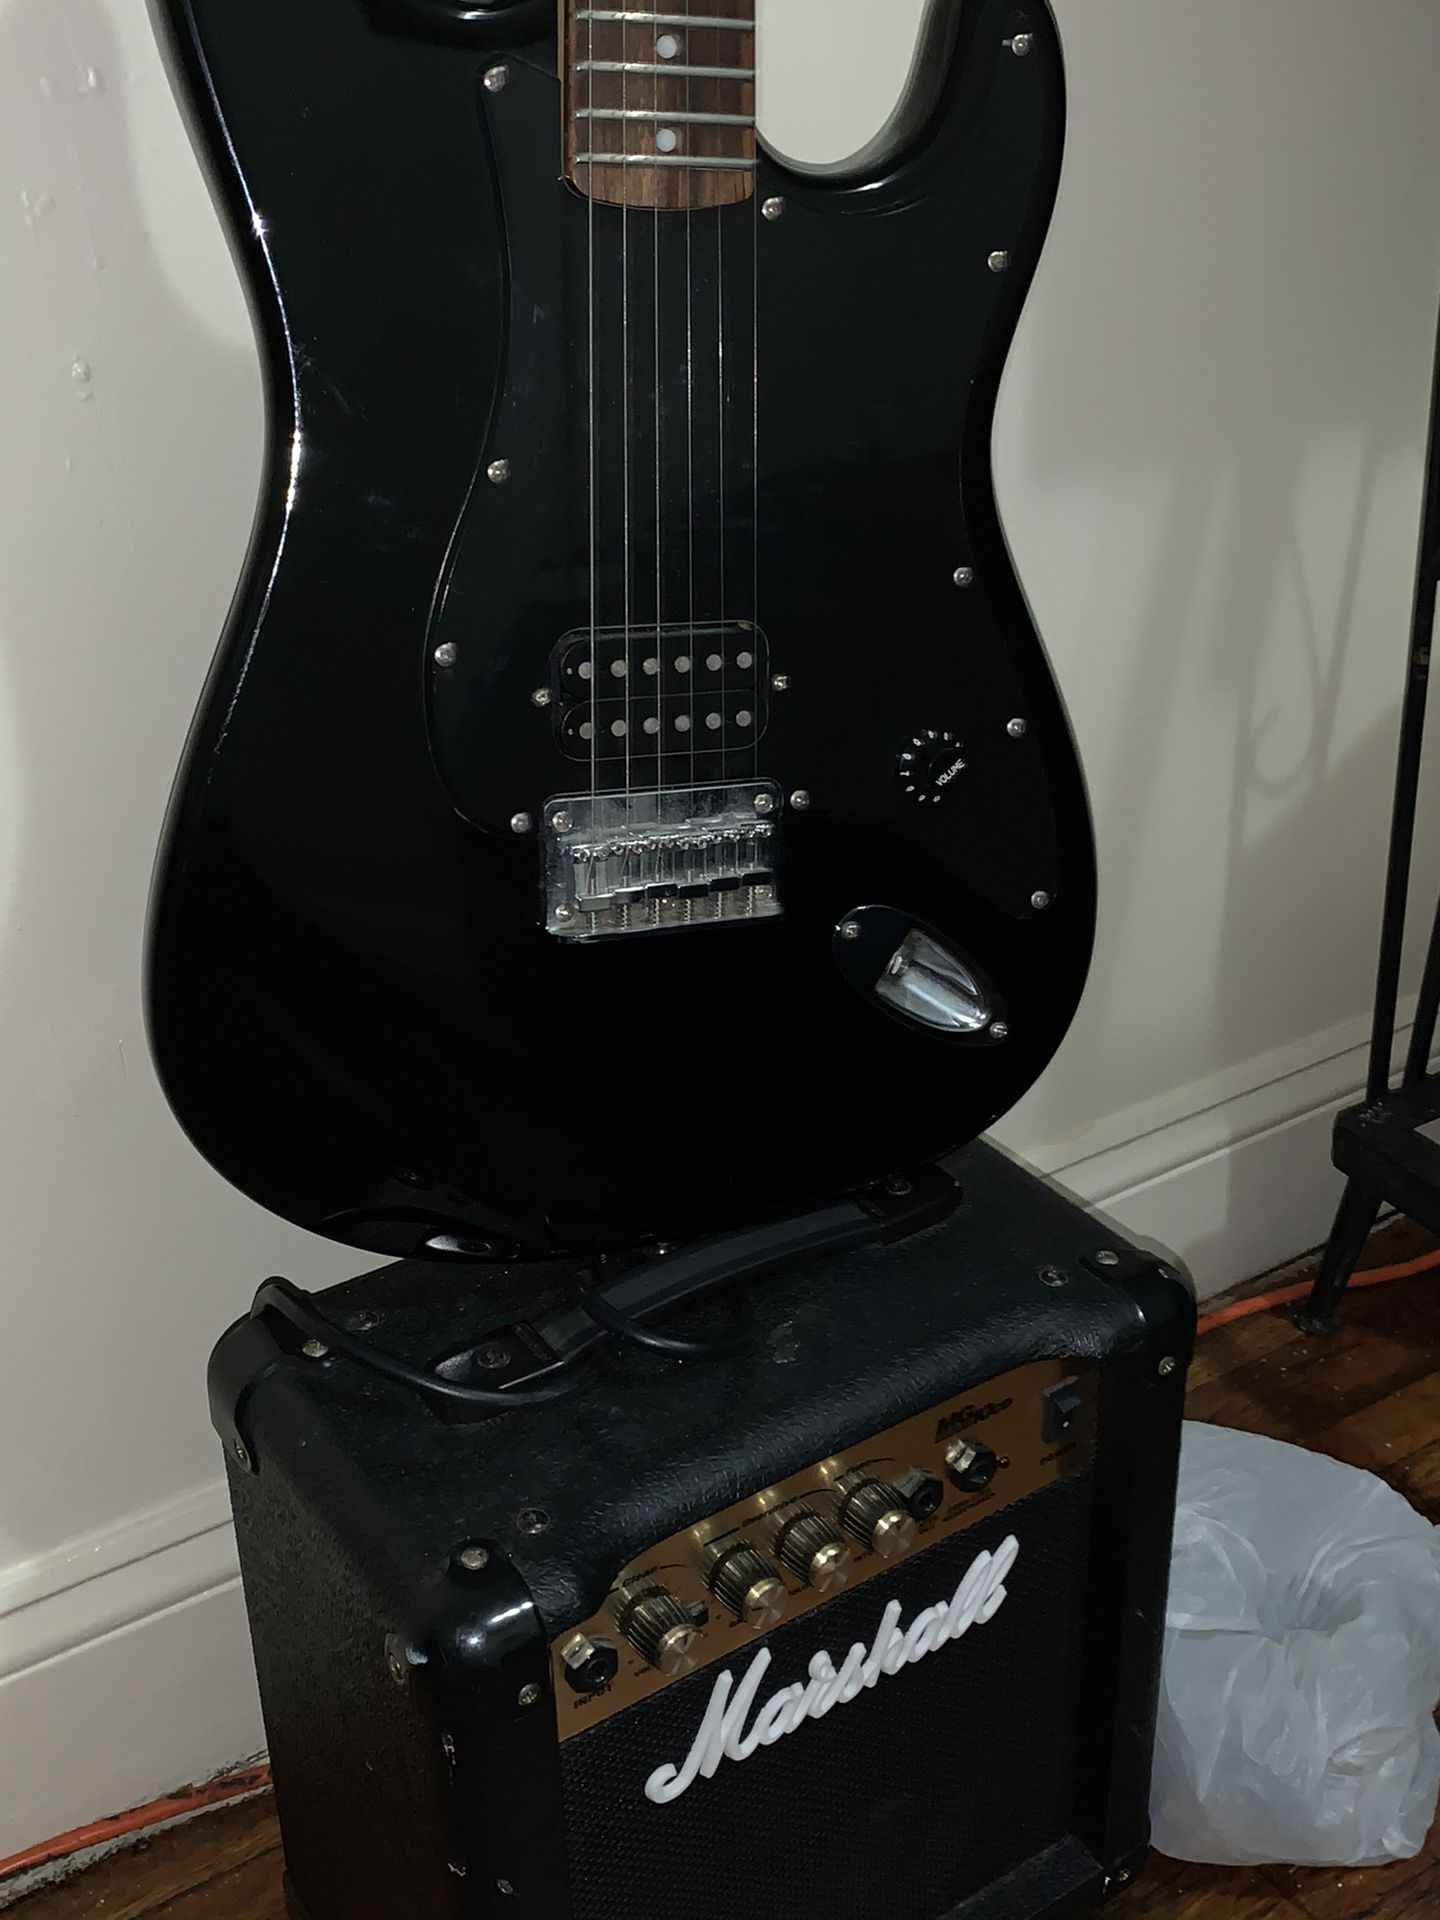 Guitar Electric “Squier” And the electric Bass “Marshall”